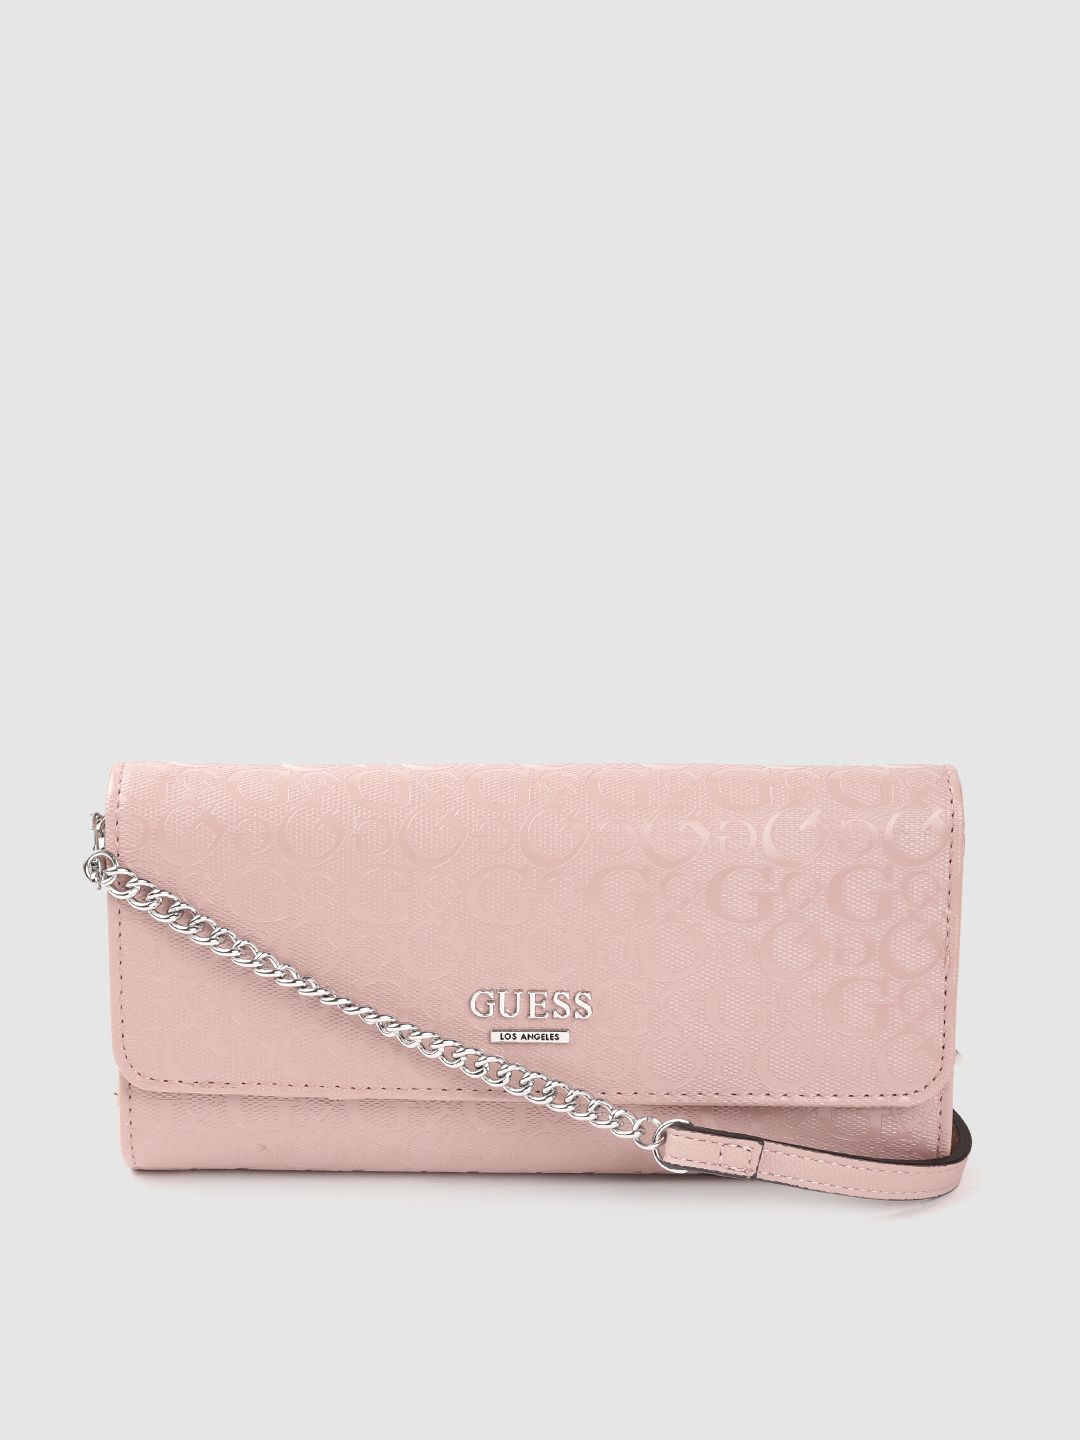 GUESS Women Mauve Brand Logo Print Three Fold Wallet Price in India